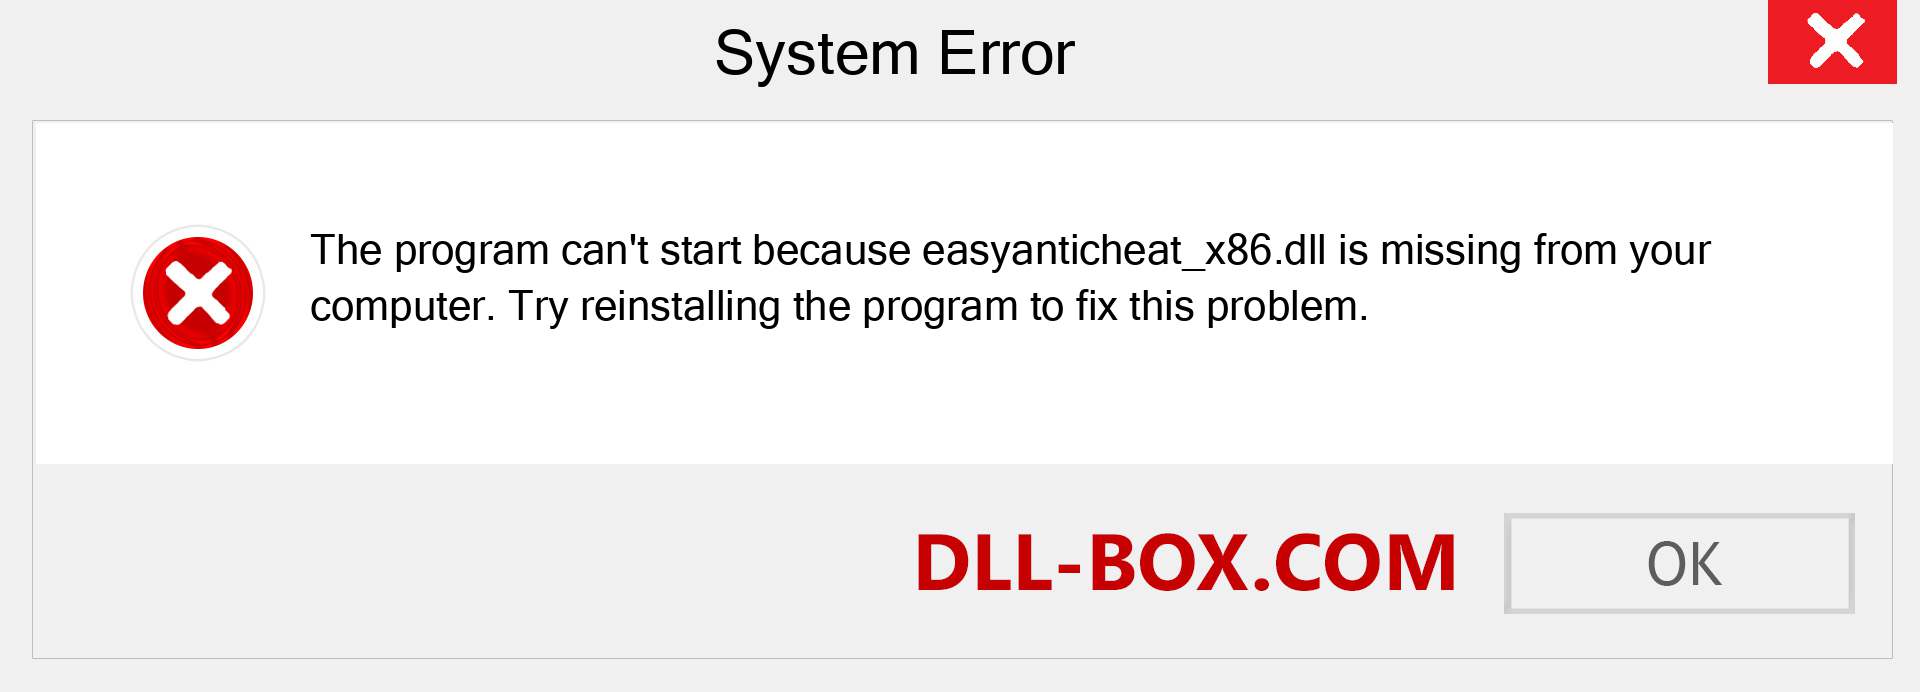  easyanticheat_x86.dll file is missing?. Download for Windows 7, 8, 10 - Fix  easyanticheat_x86 dll Missing Error on Windows, photos, images